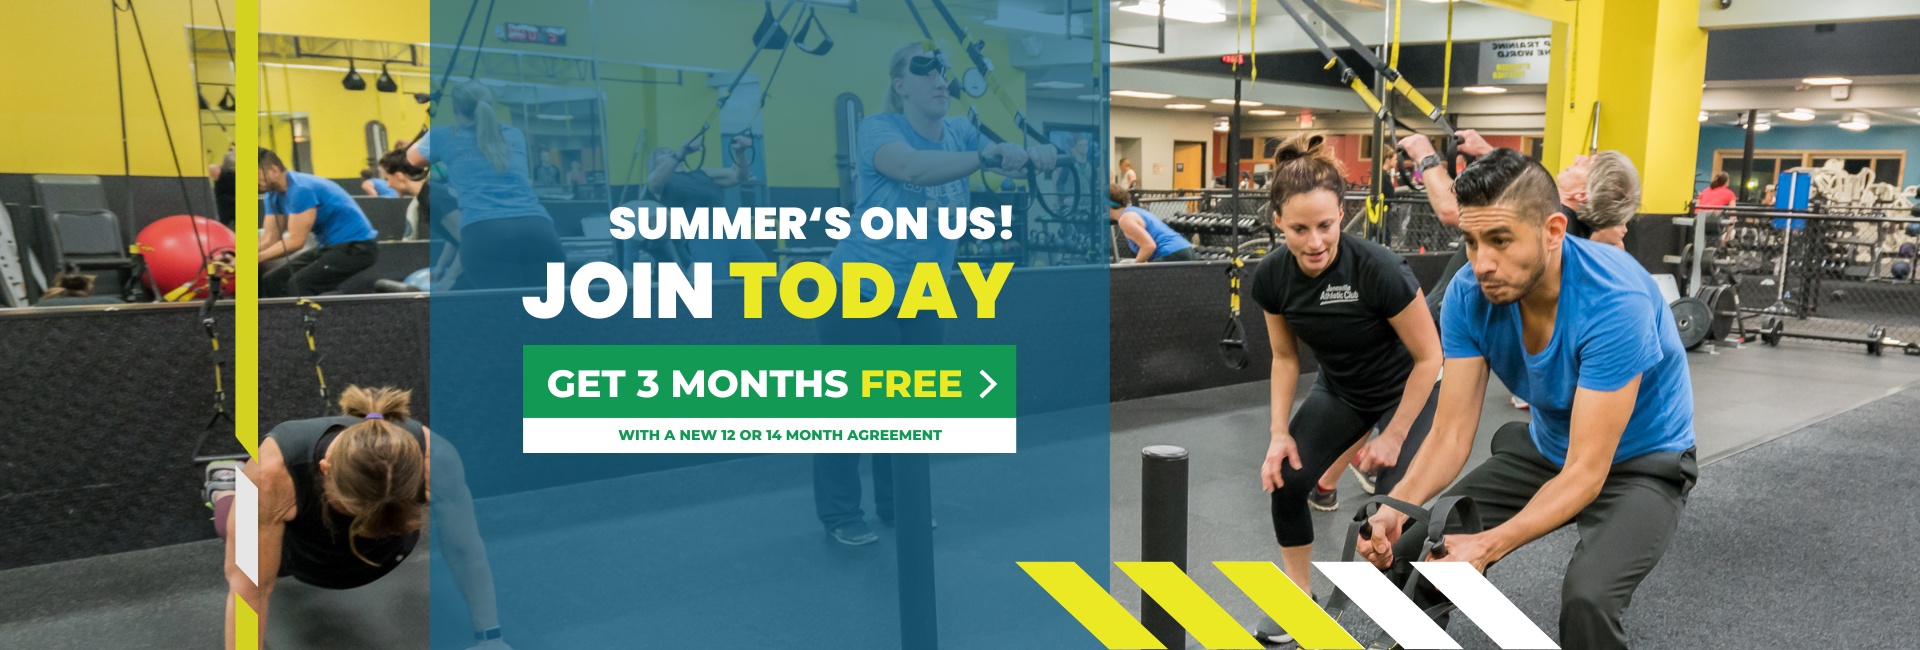 join and get 3 months free janesville athletic club